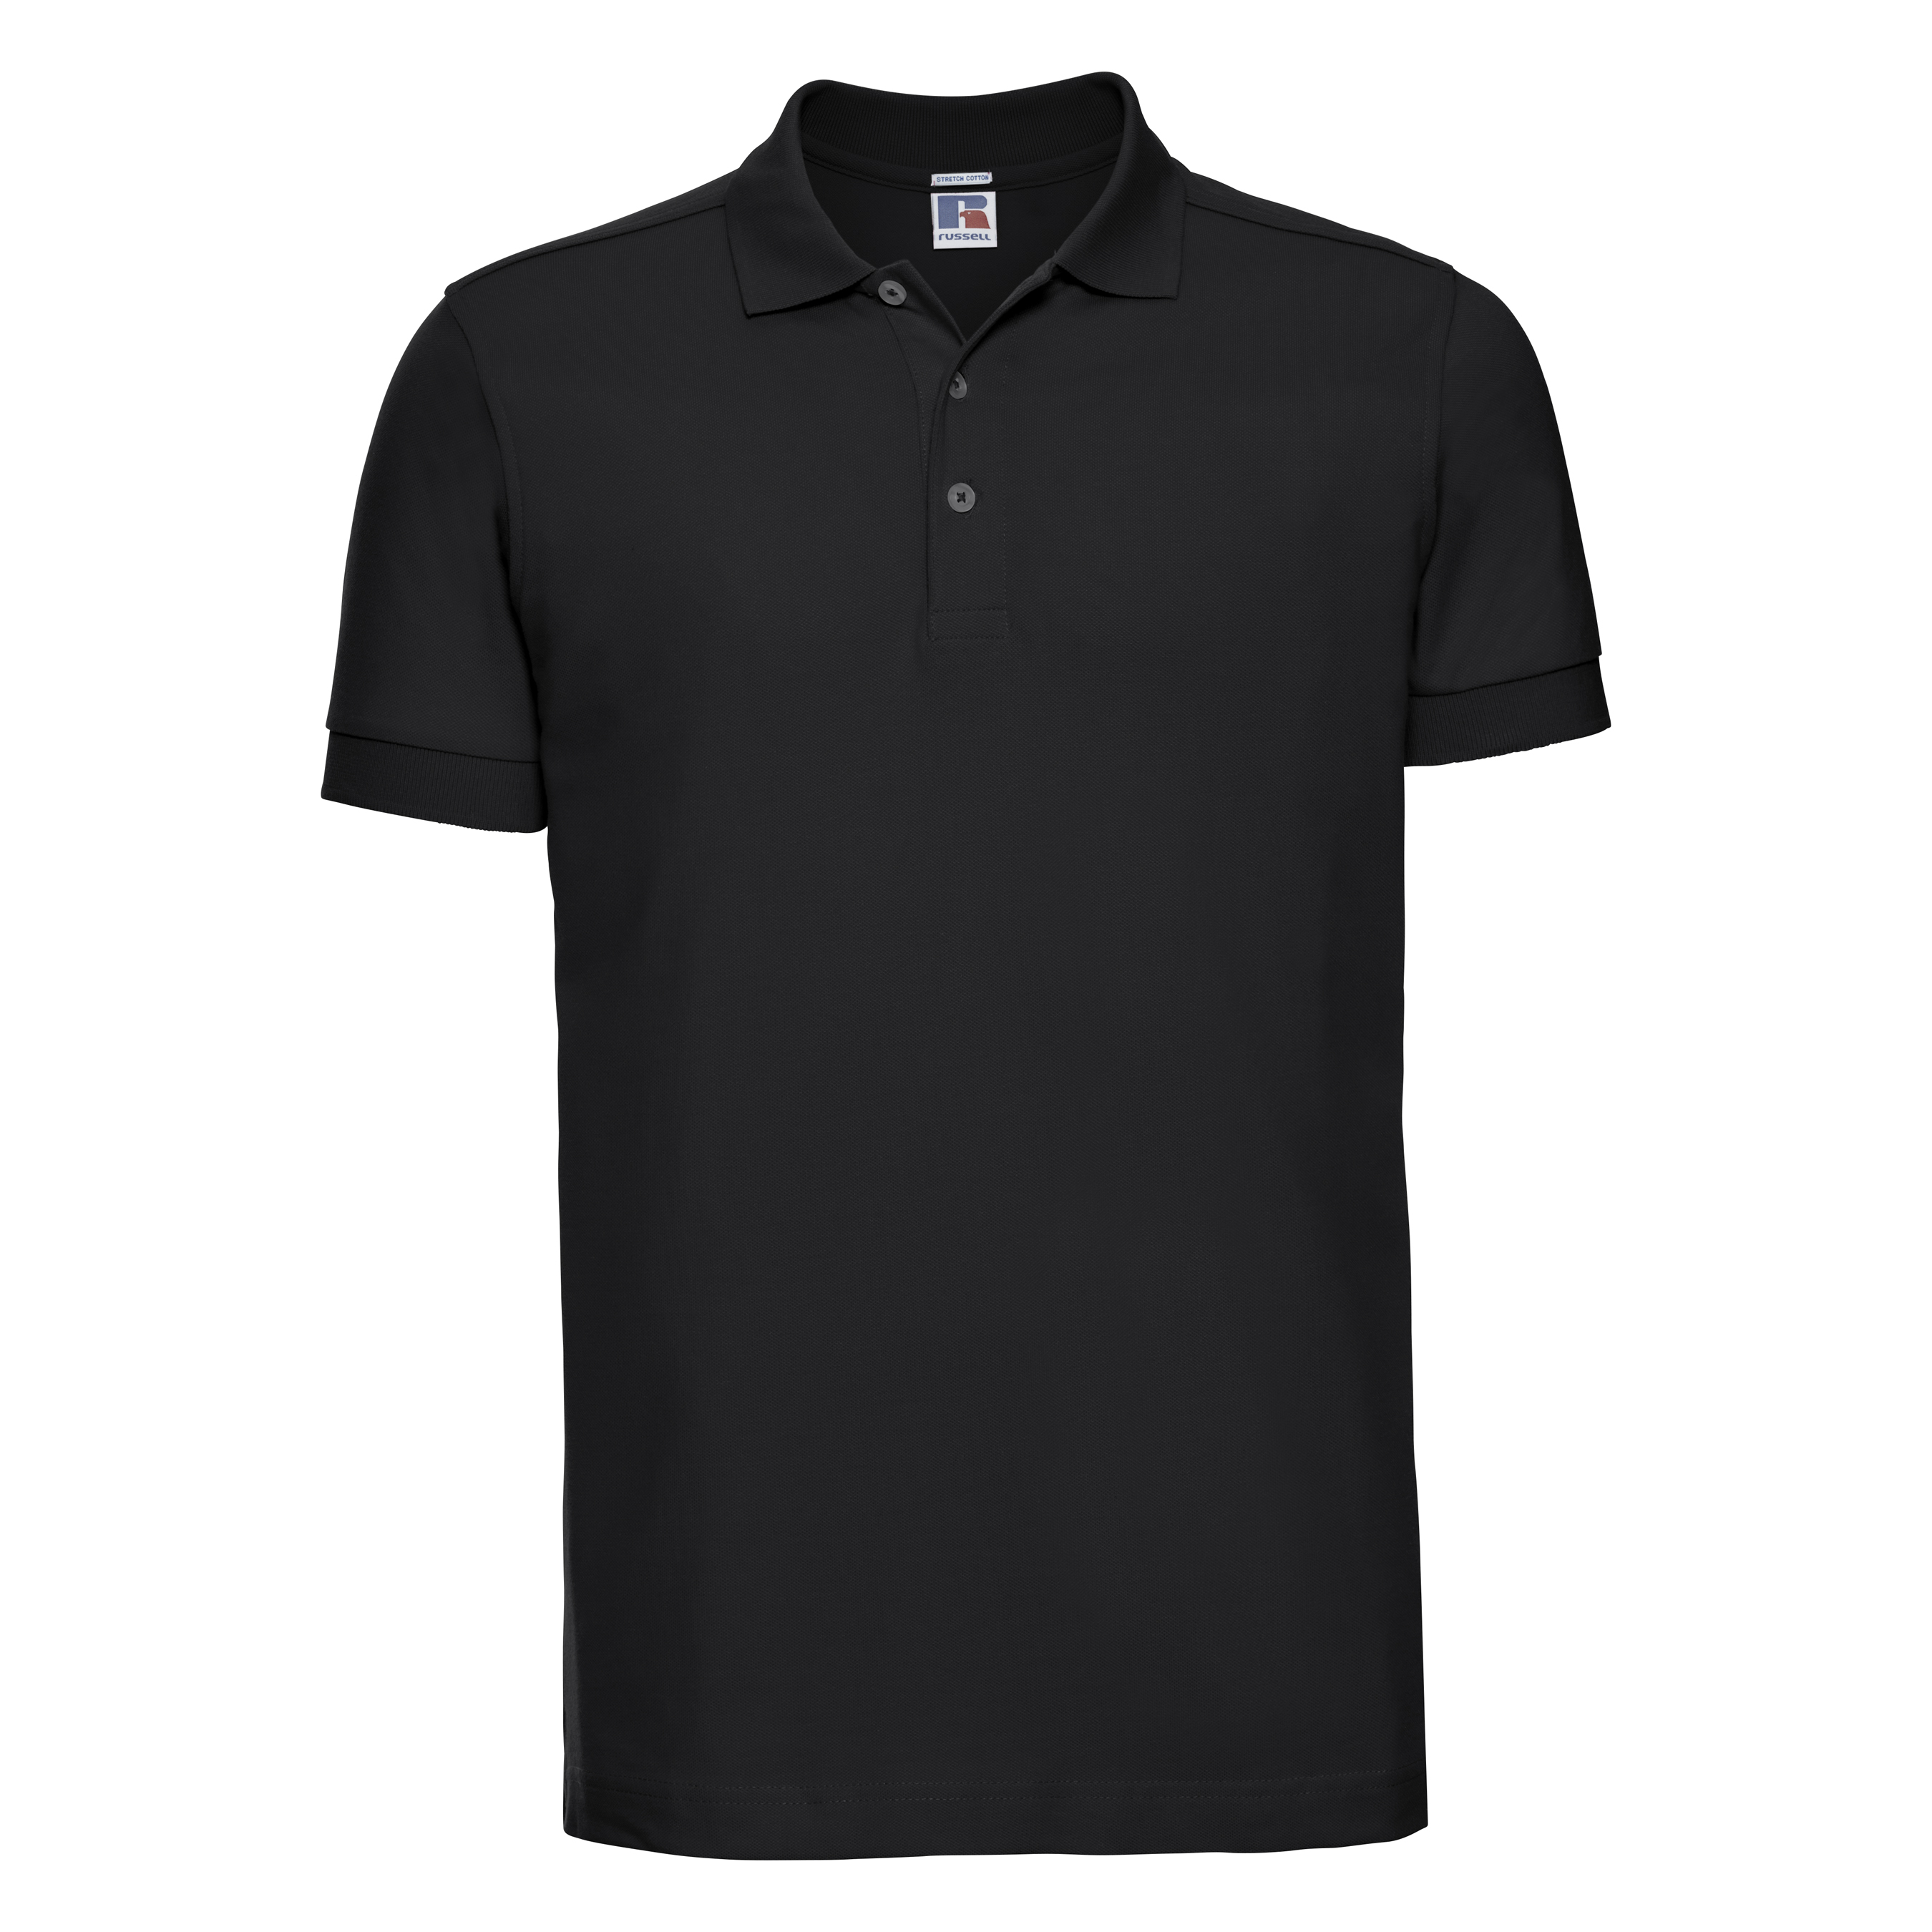 ax-httpswebsystems.s3.amazonaws.comtmp_for_downloadrussell-stretch-polo-black.jpg